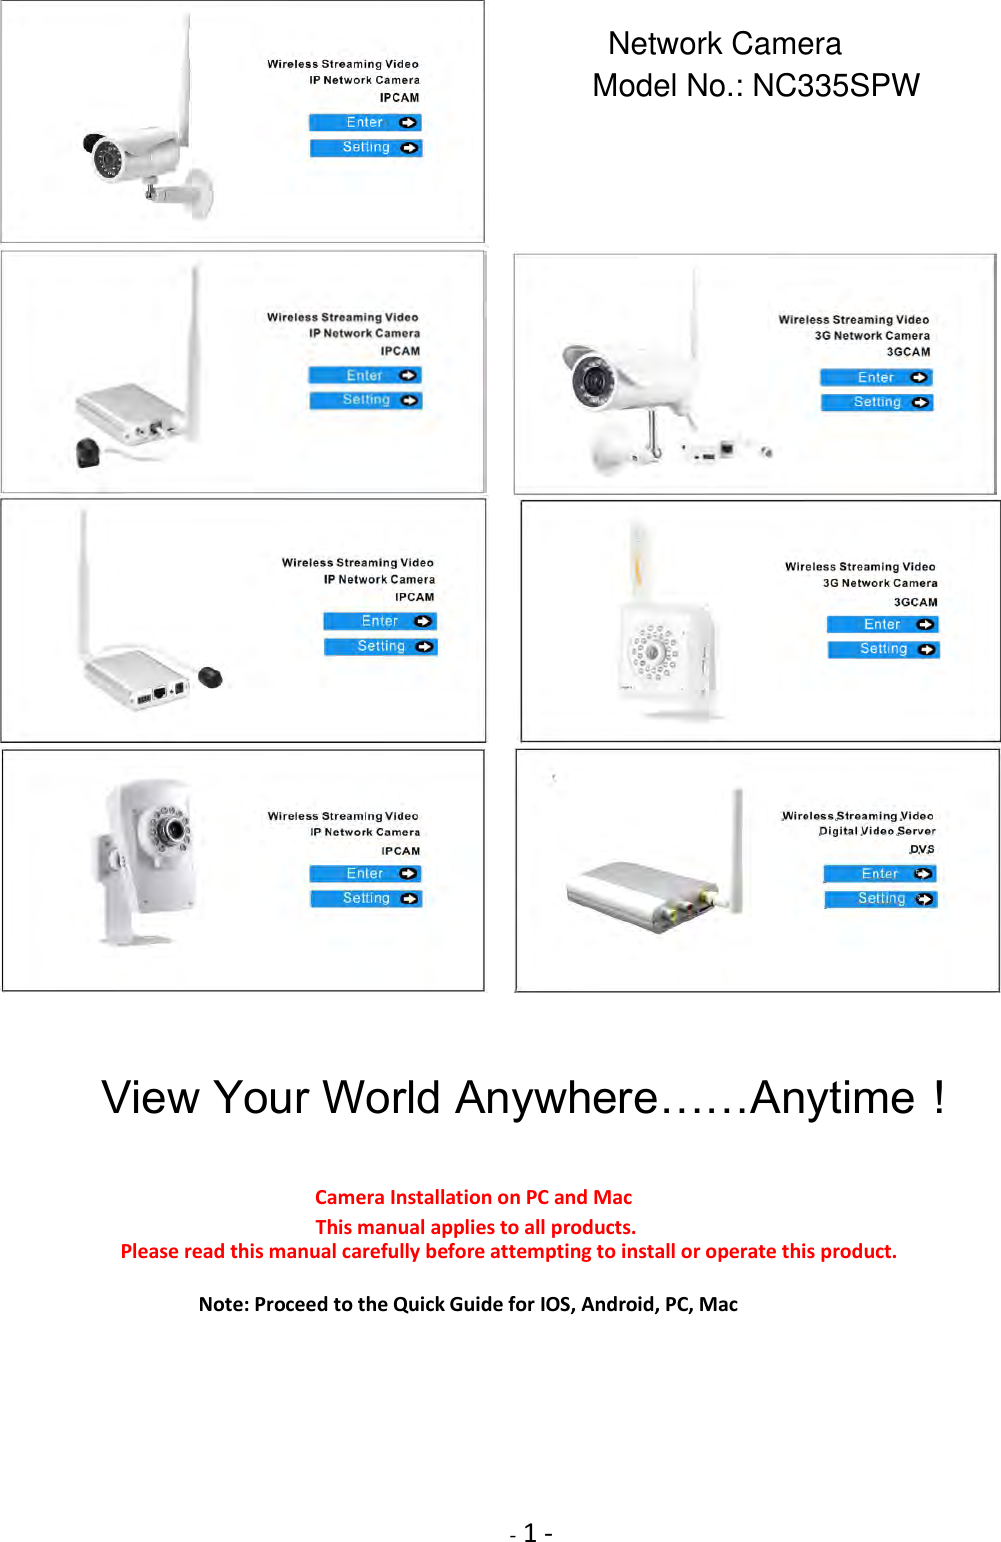     - 1 -                       View Your World Anywhere……Anytime！    Camera Installation on PC and Mac        This manual applies to all products.             Please read this manual carefully before attempting to install or operate this product.  Note: Proceed to the Quick Guide for IOS, Android, PC, Mac         Network CameraModel No.: NC335SPW